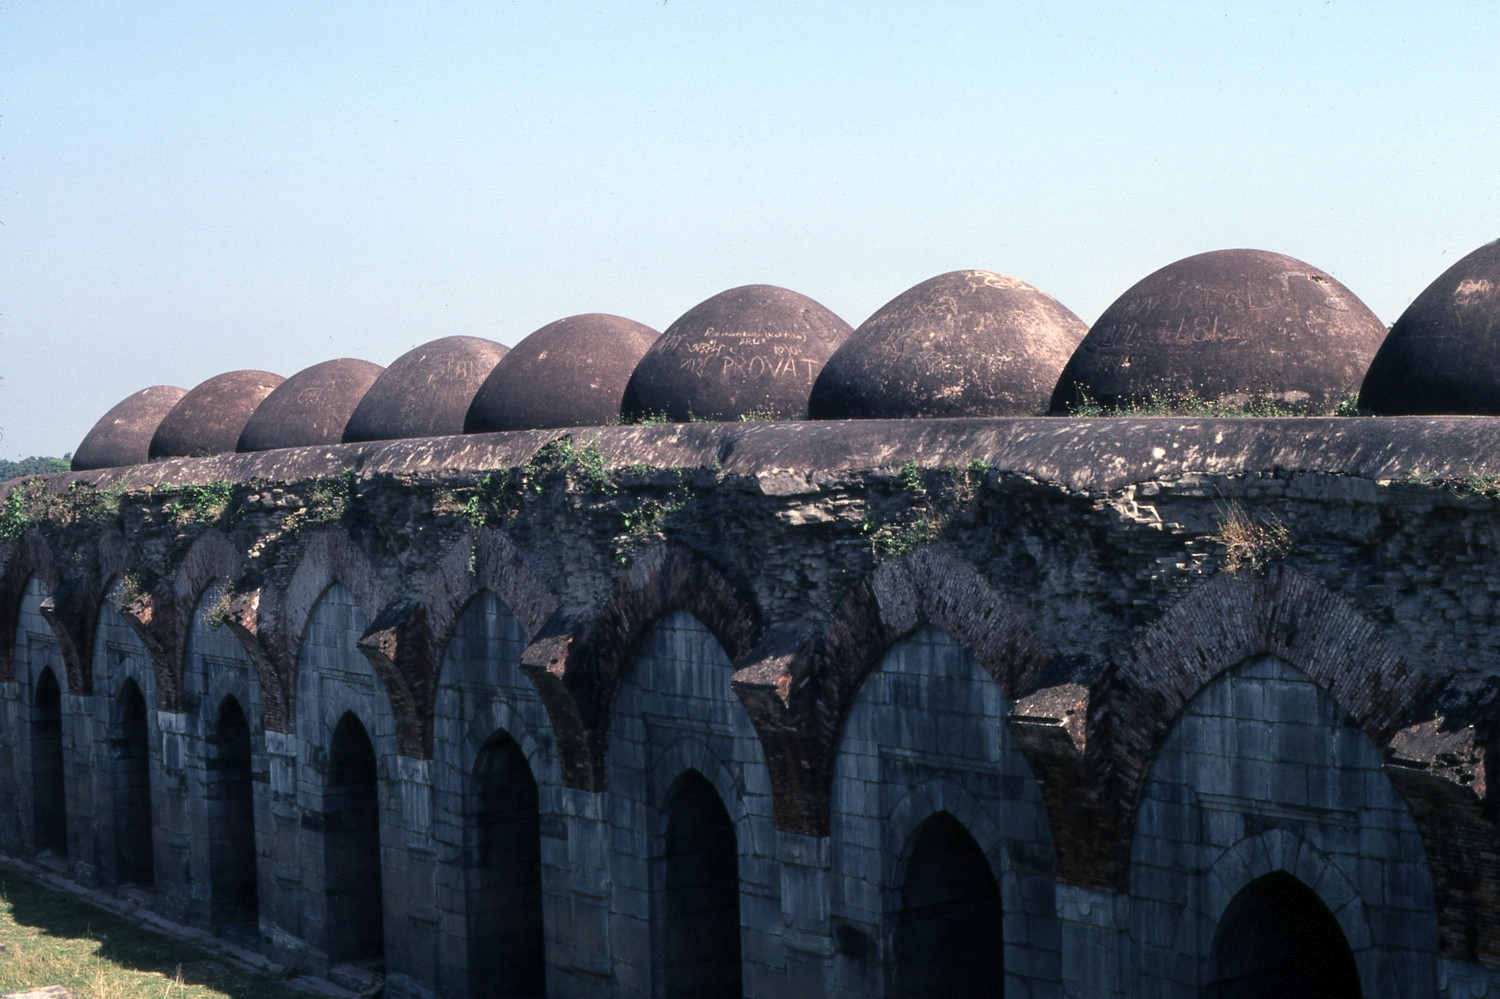 View of the western (inner) side of the verandah, showing row of domes